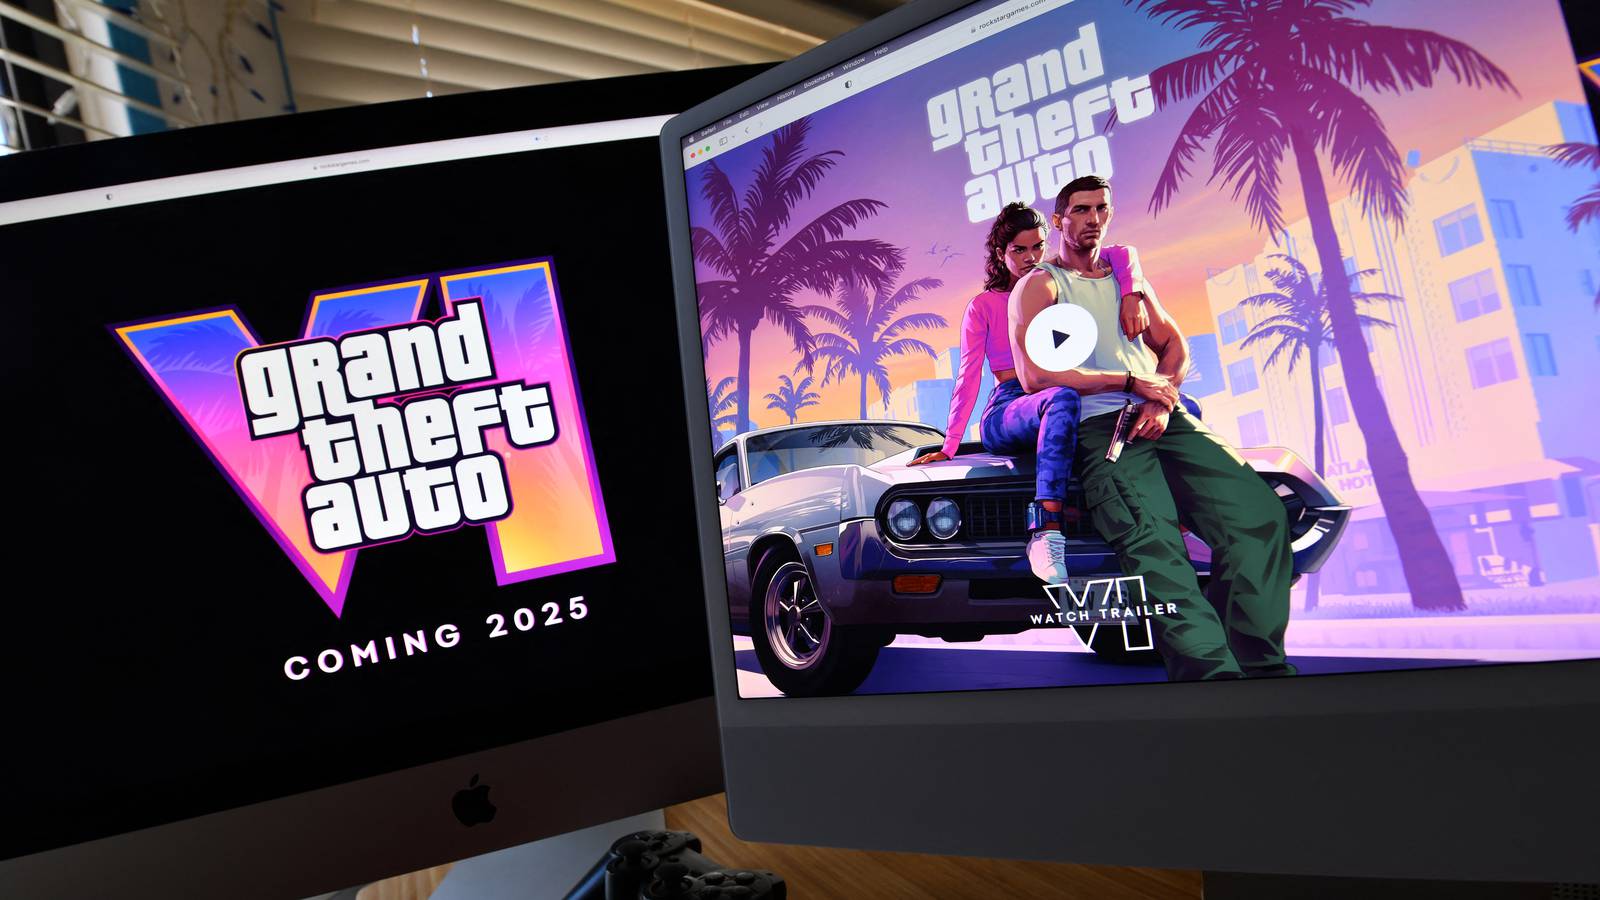 Mark your diaries: the trailer for Grand Theft Auto 6 will land in December